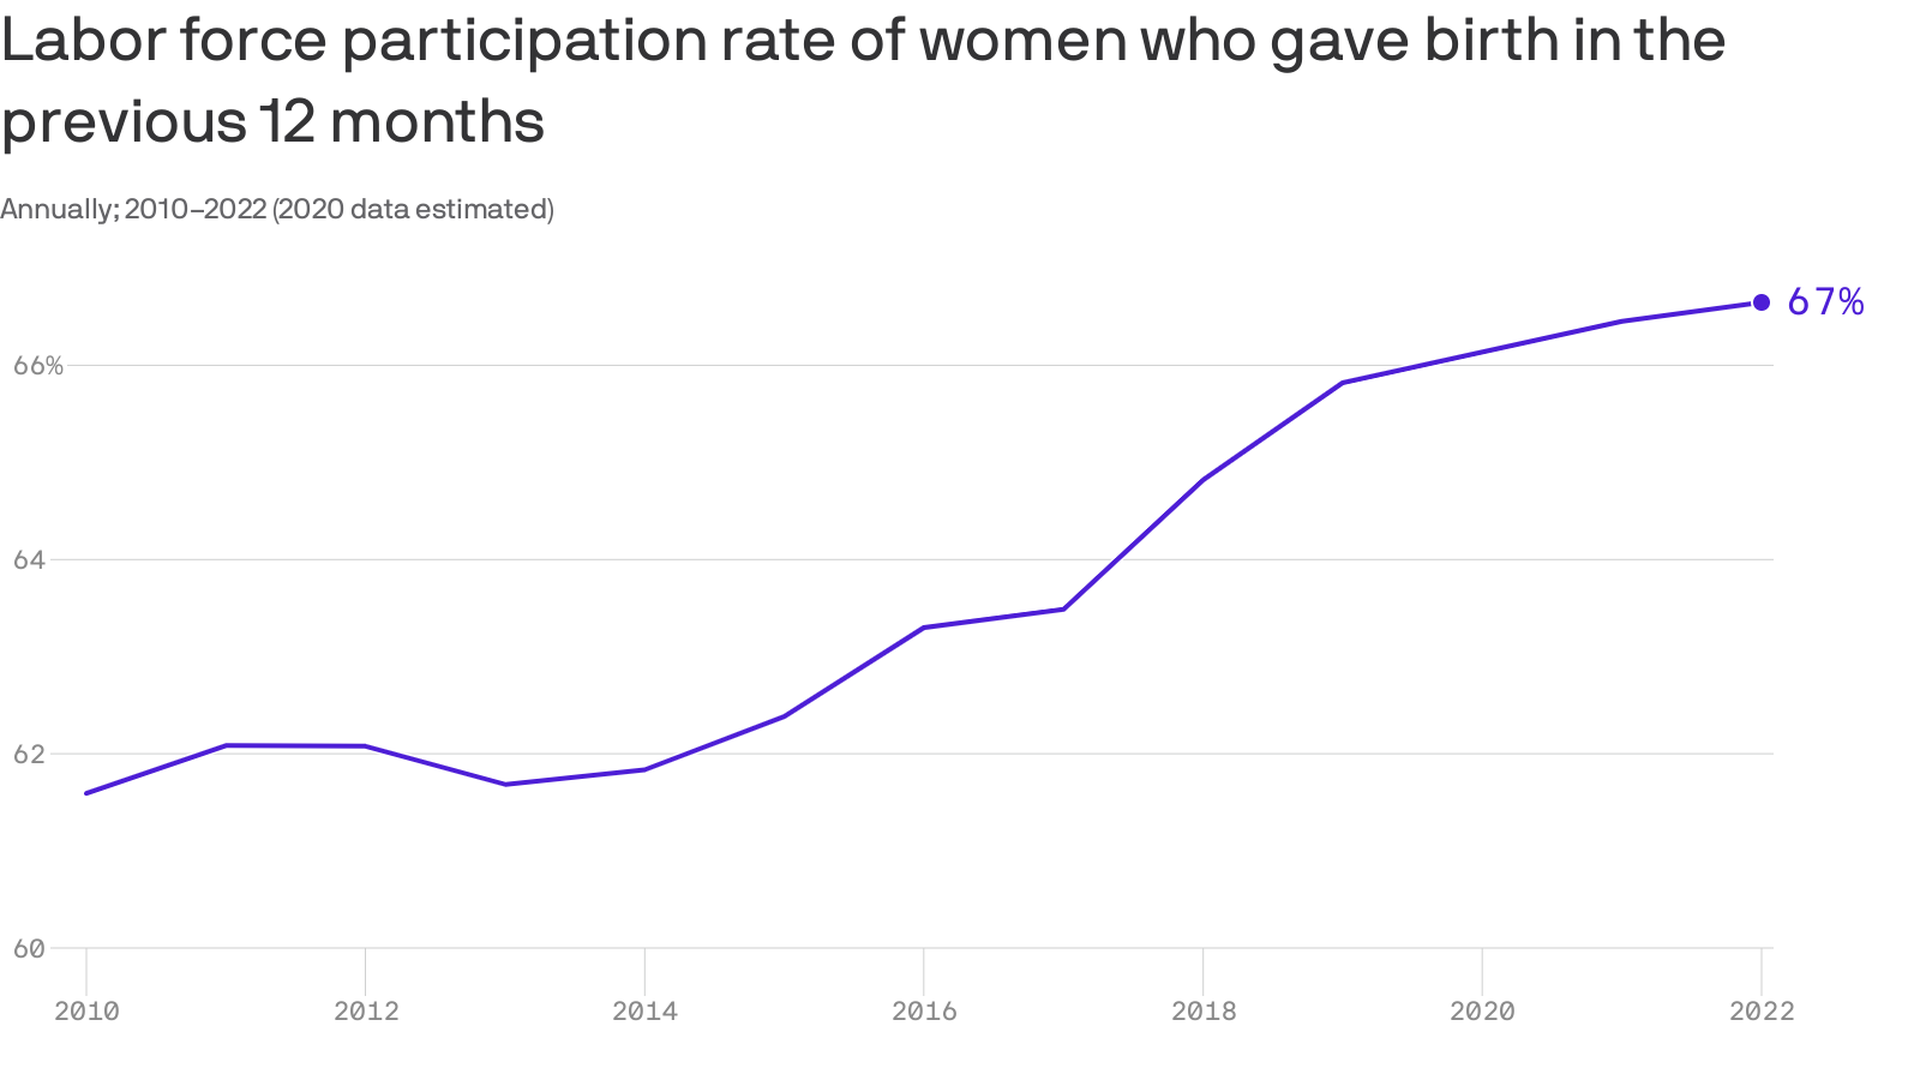 Line chart showing the labor force participation rate of women who gave birth in the previous 12 months, from 2010 to 2022. The rate has risen fairly steadily from just under 62% in 2010 to nearly 67% in 2022.